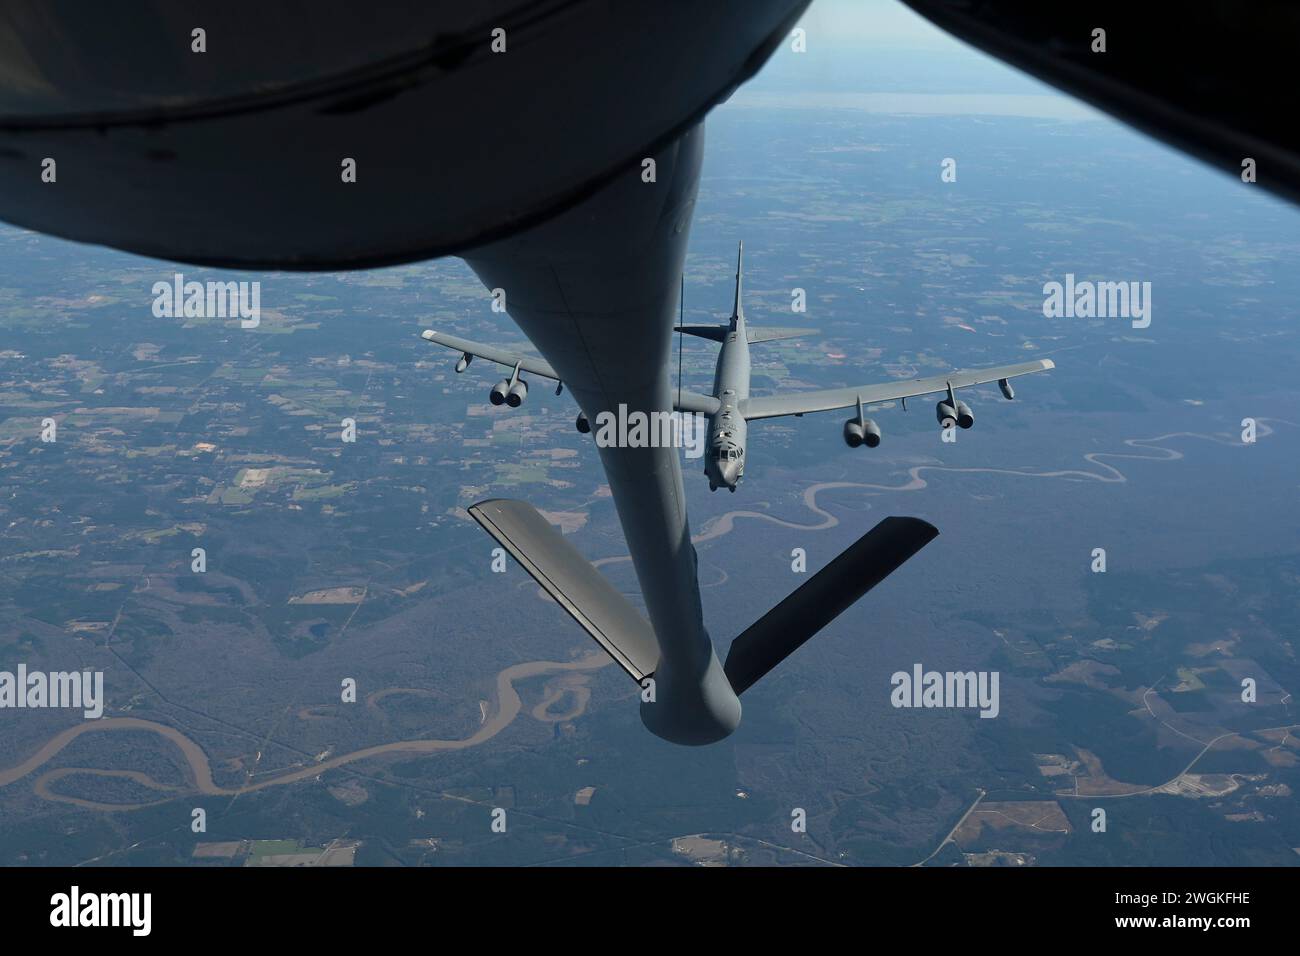 , United States. 30 January, 2024. A U.S. Air Force B-52 Stratofortress strategic bomber aircraft from the 11th Bomb Squadron, approaches a KC-135 Stratotanker aircraft for refueling, January 30, 2024 over the Southern United States. Credit: SrA Jessica Do/US Air Force/Alamy Live News Stock Photo